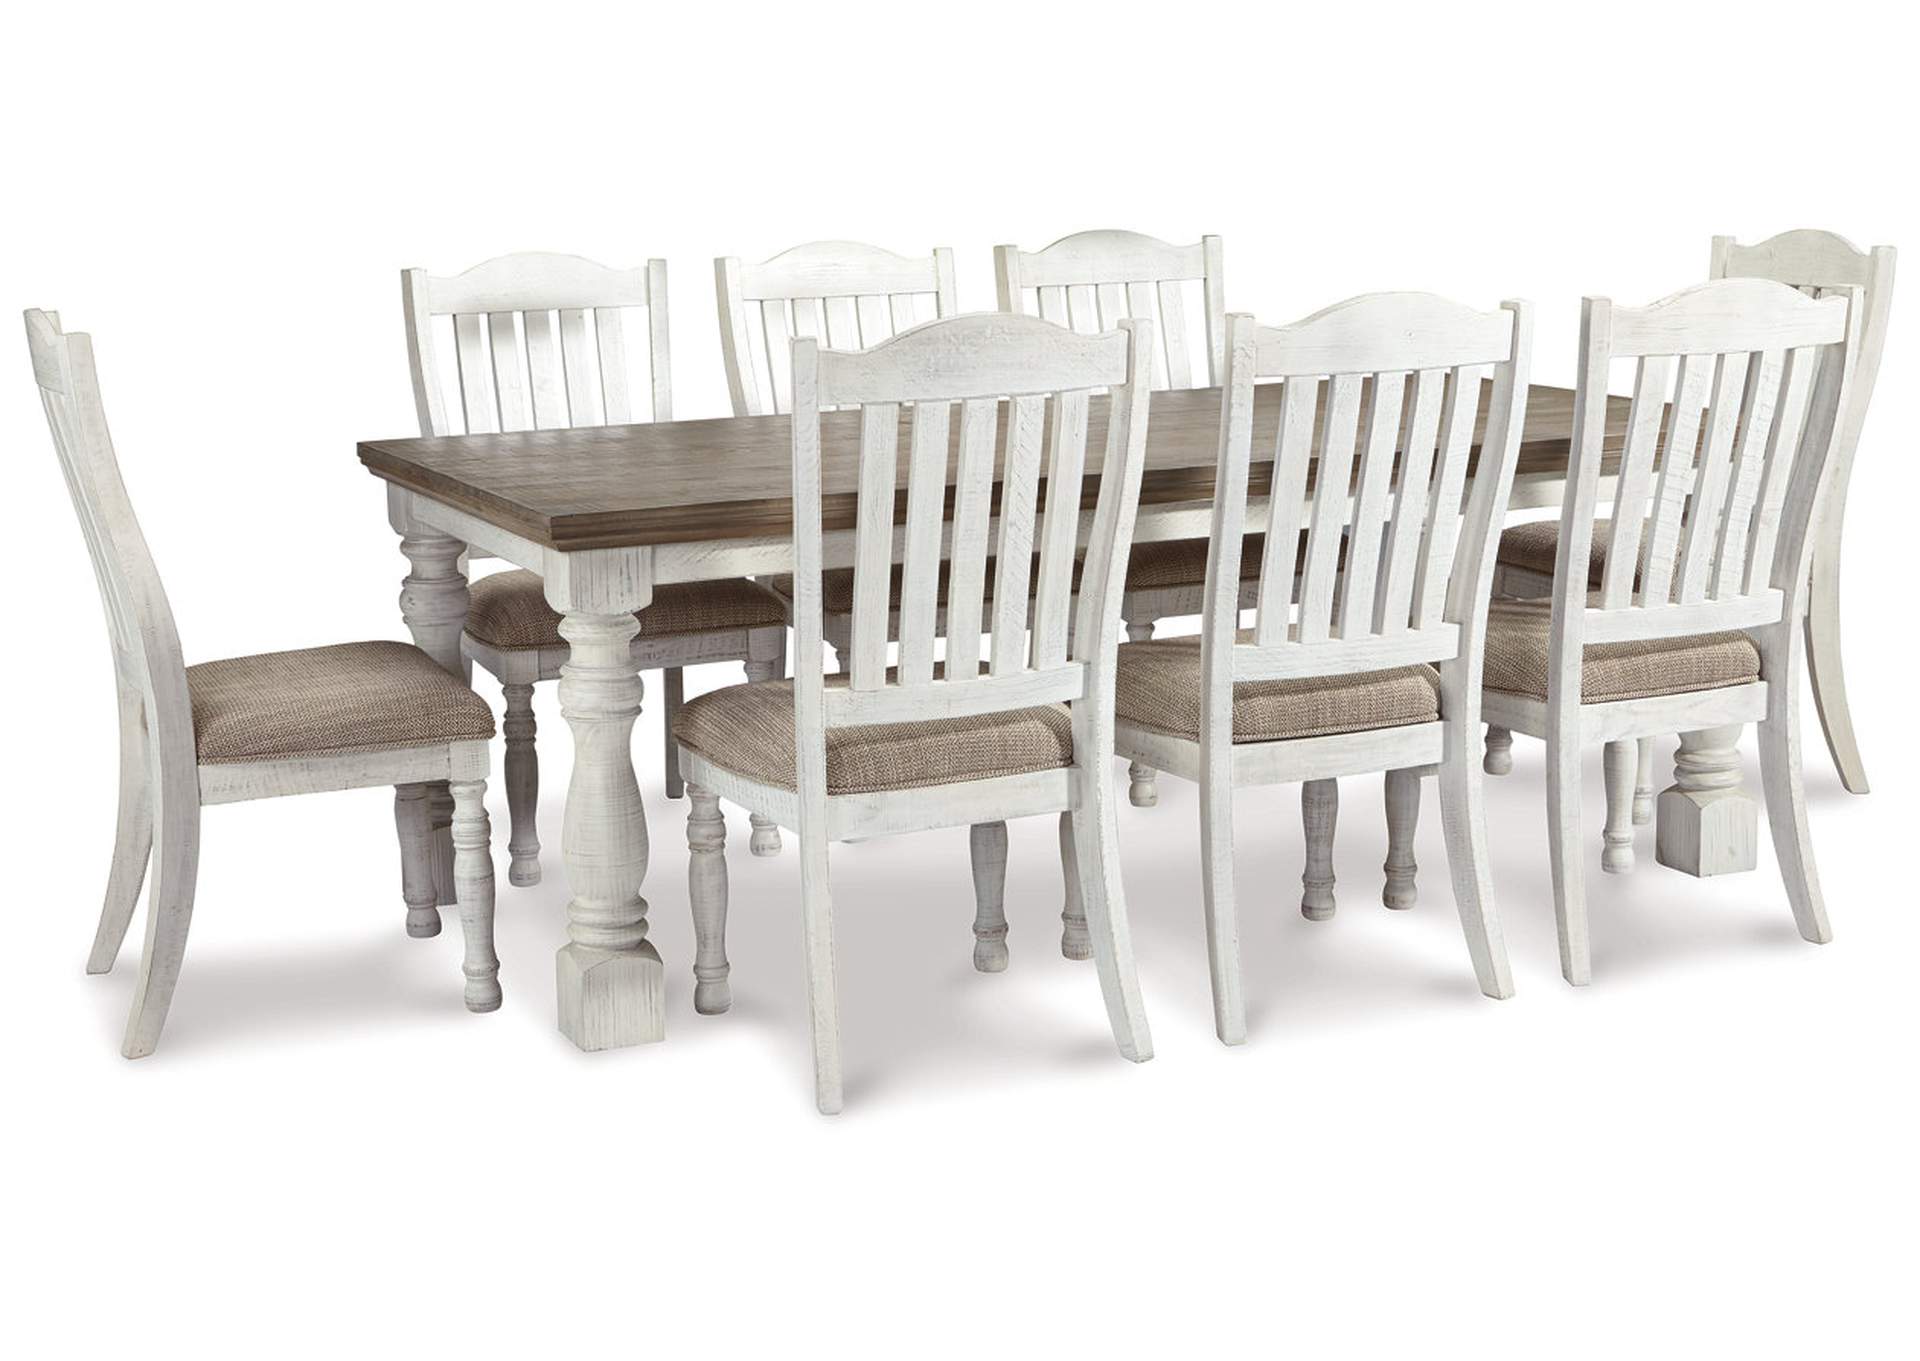 Havalance Dining Table and 8 Chairs,Millennium